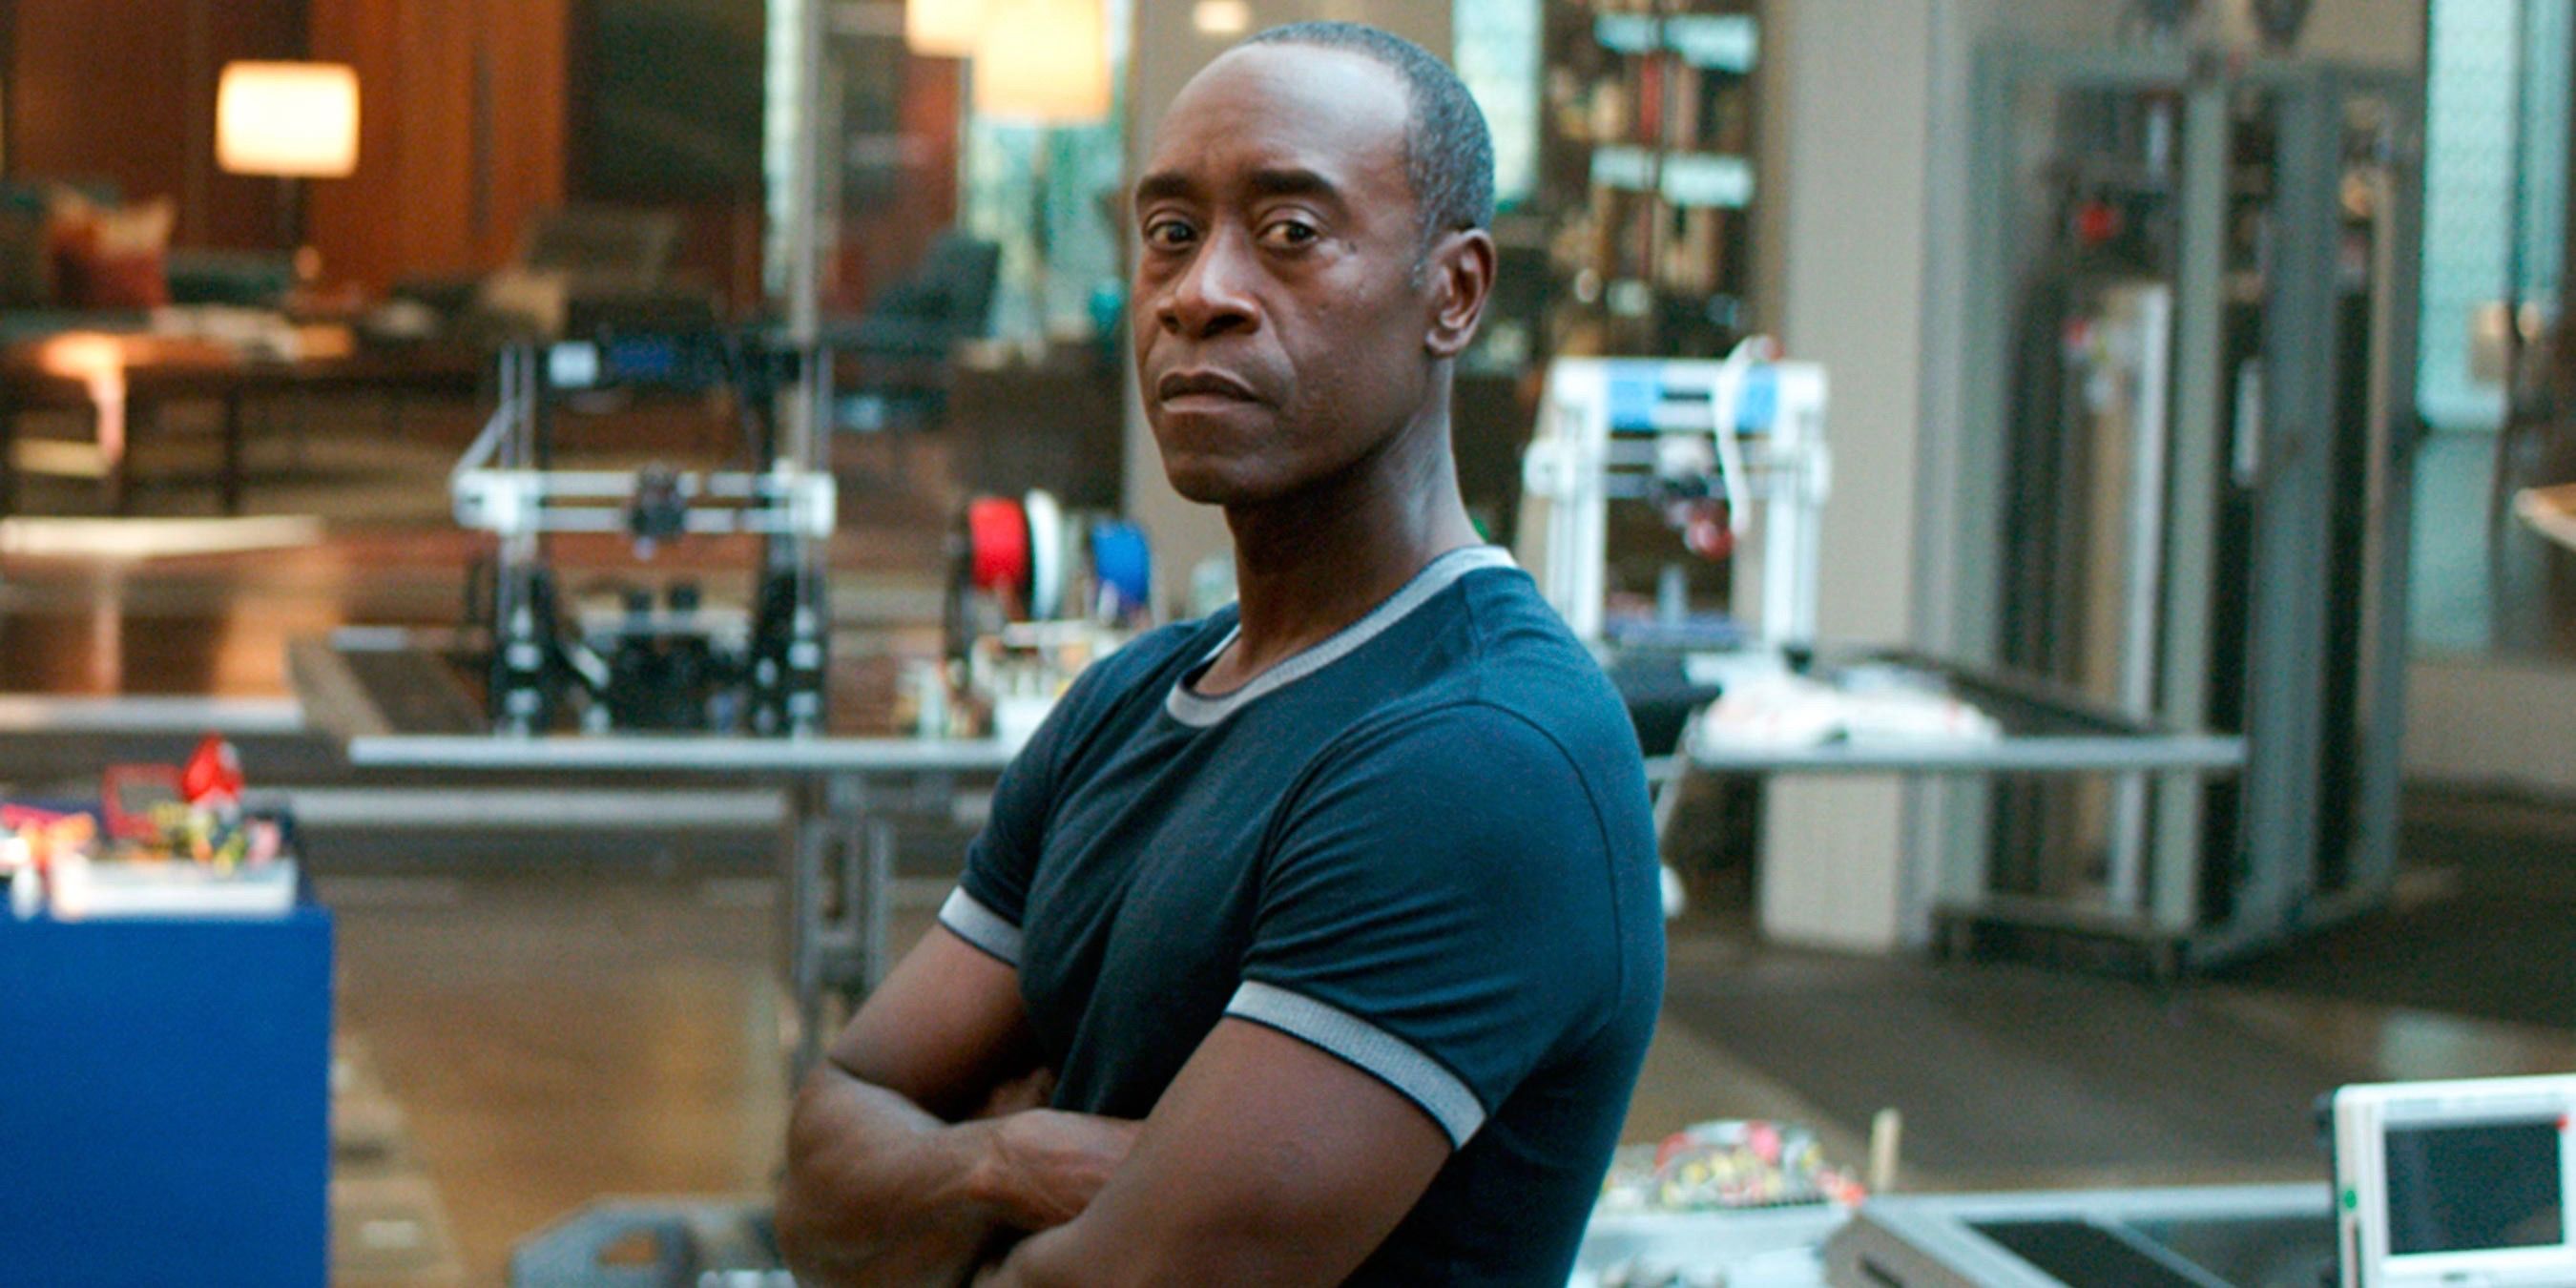 Rhodey with his arms crossed in the Avengers compound in Avengers: Infinity War.